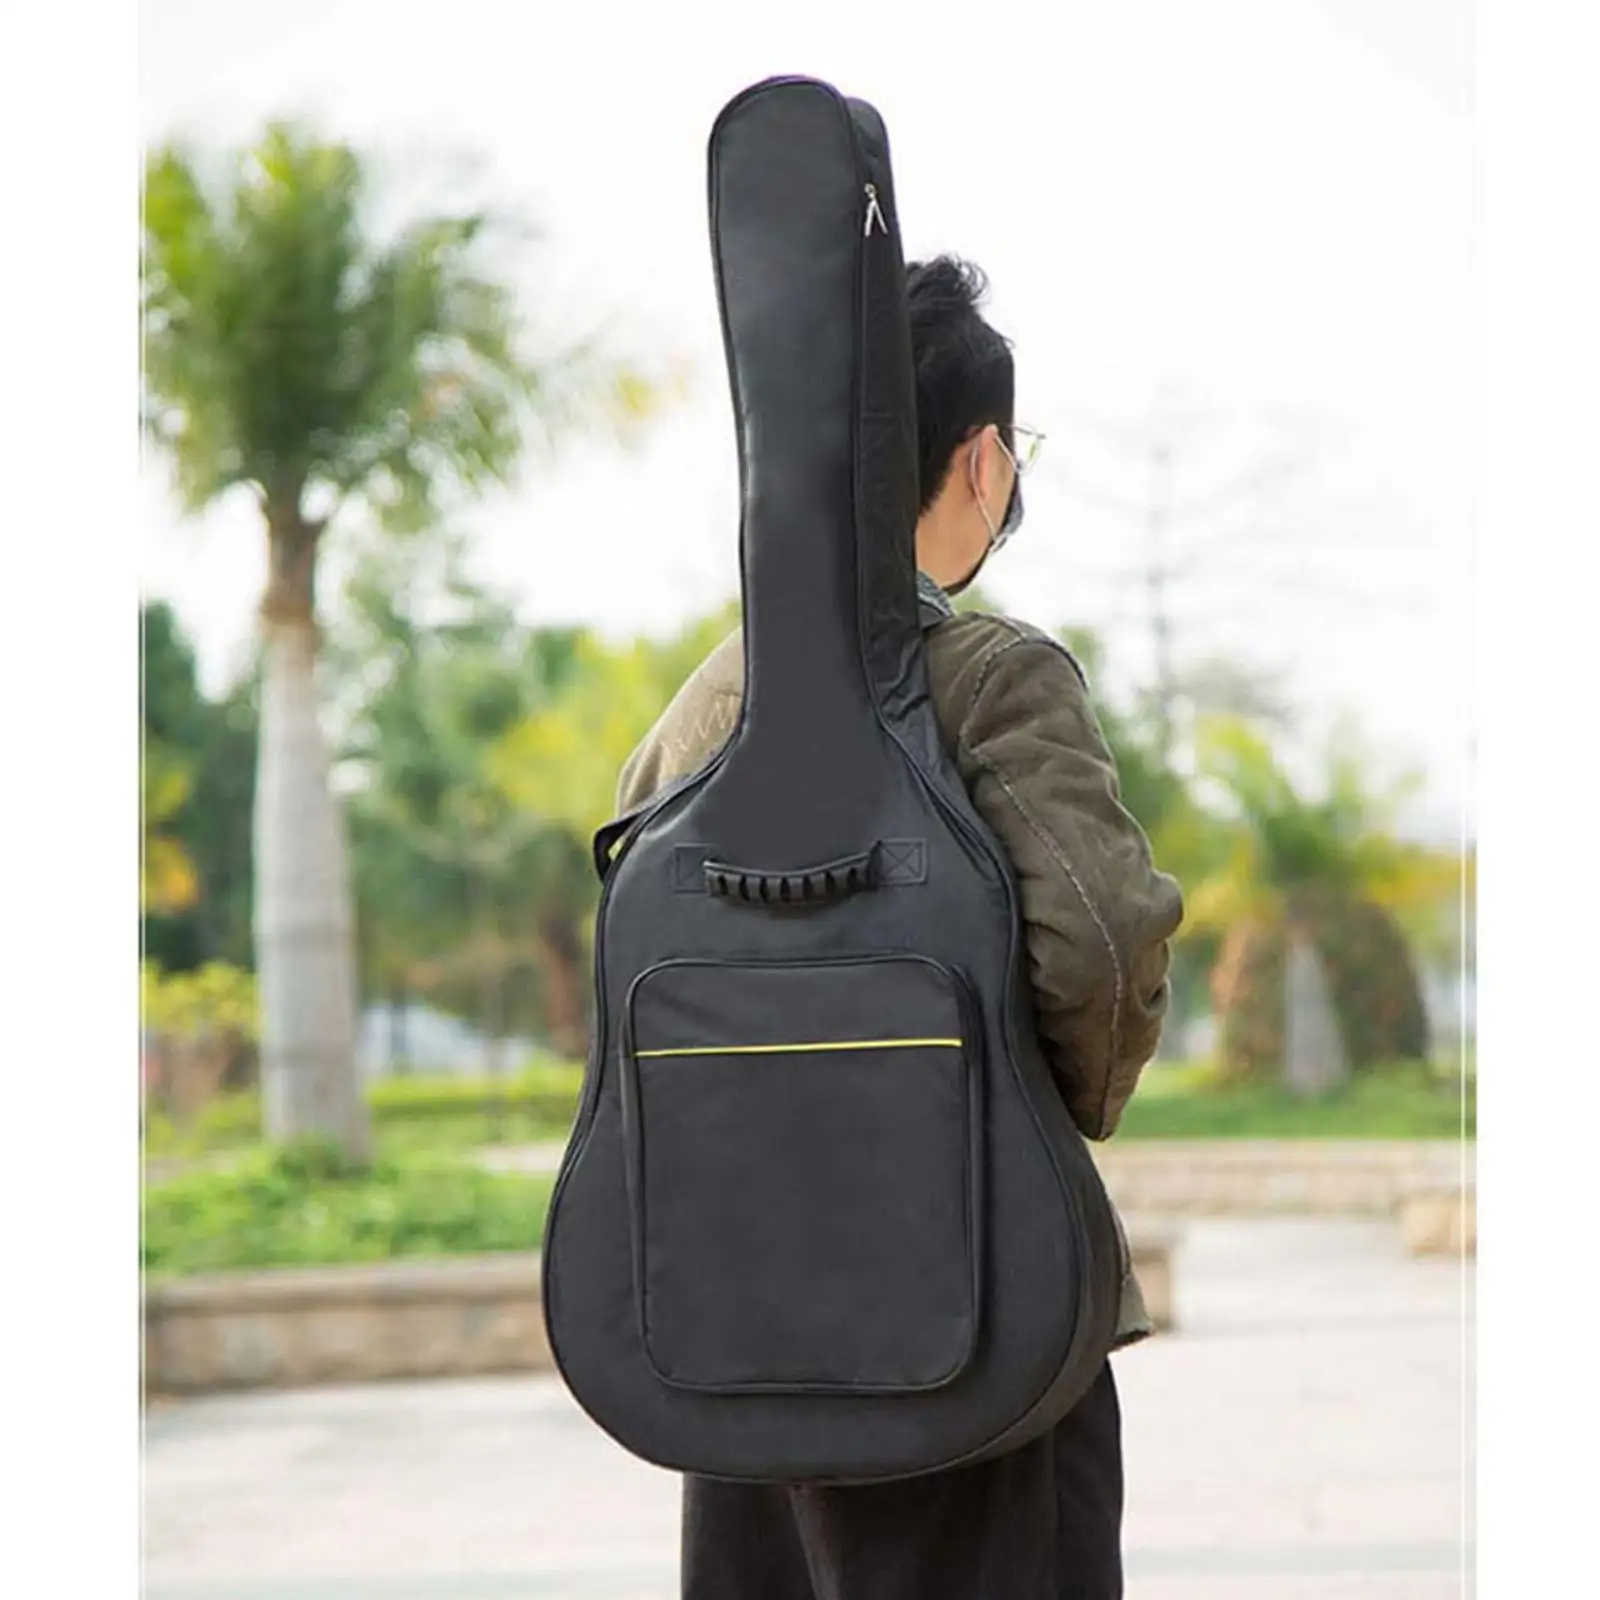 Waterproof 39 `` Inch Guitar Carrying Gig Case Padded Shoulder